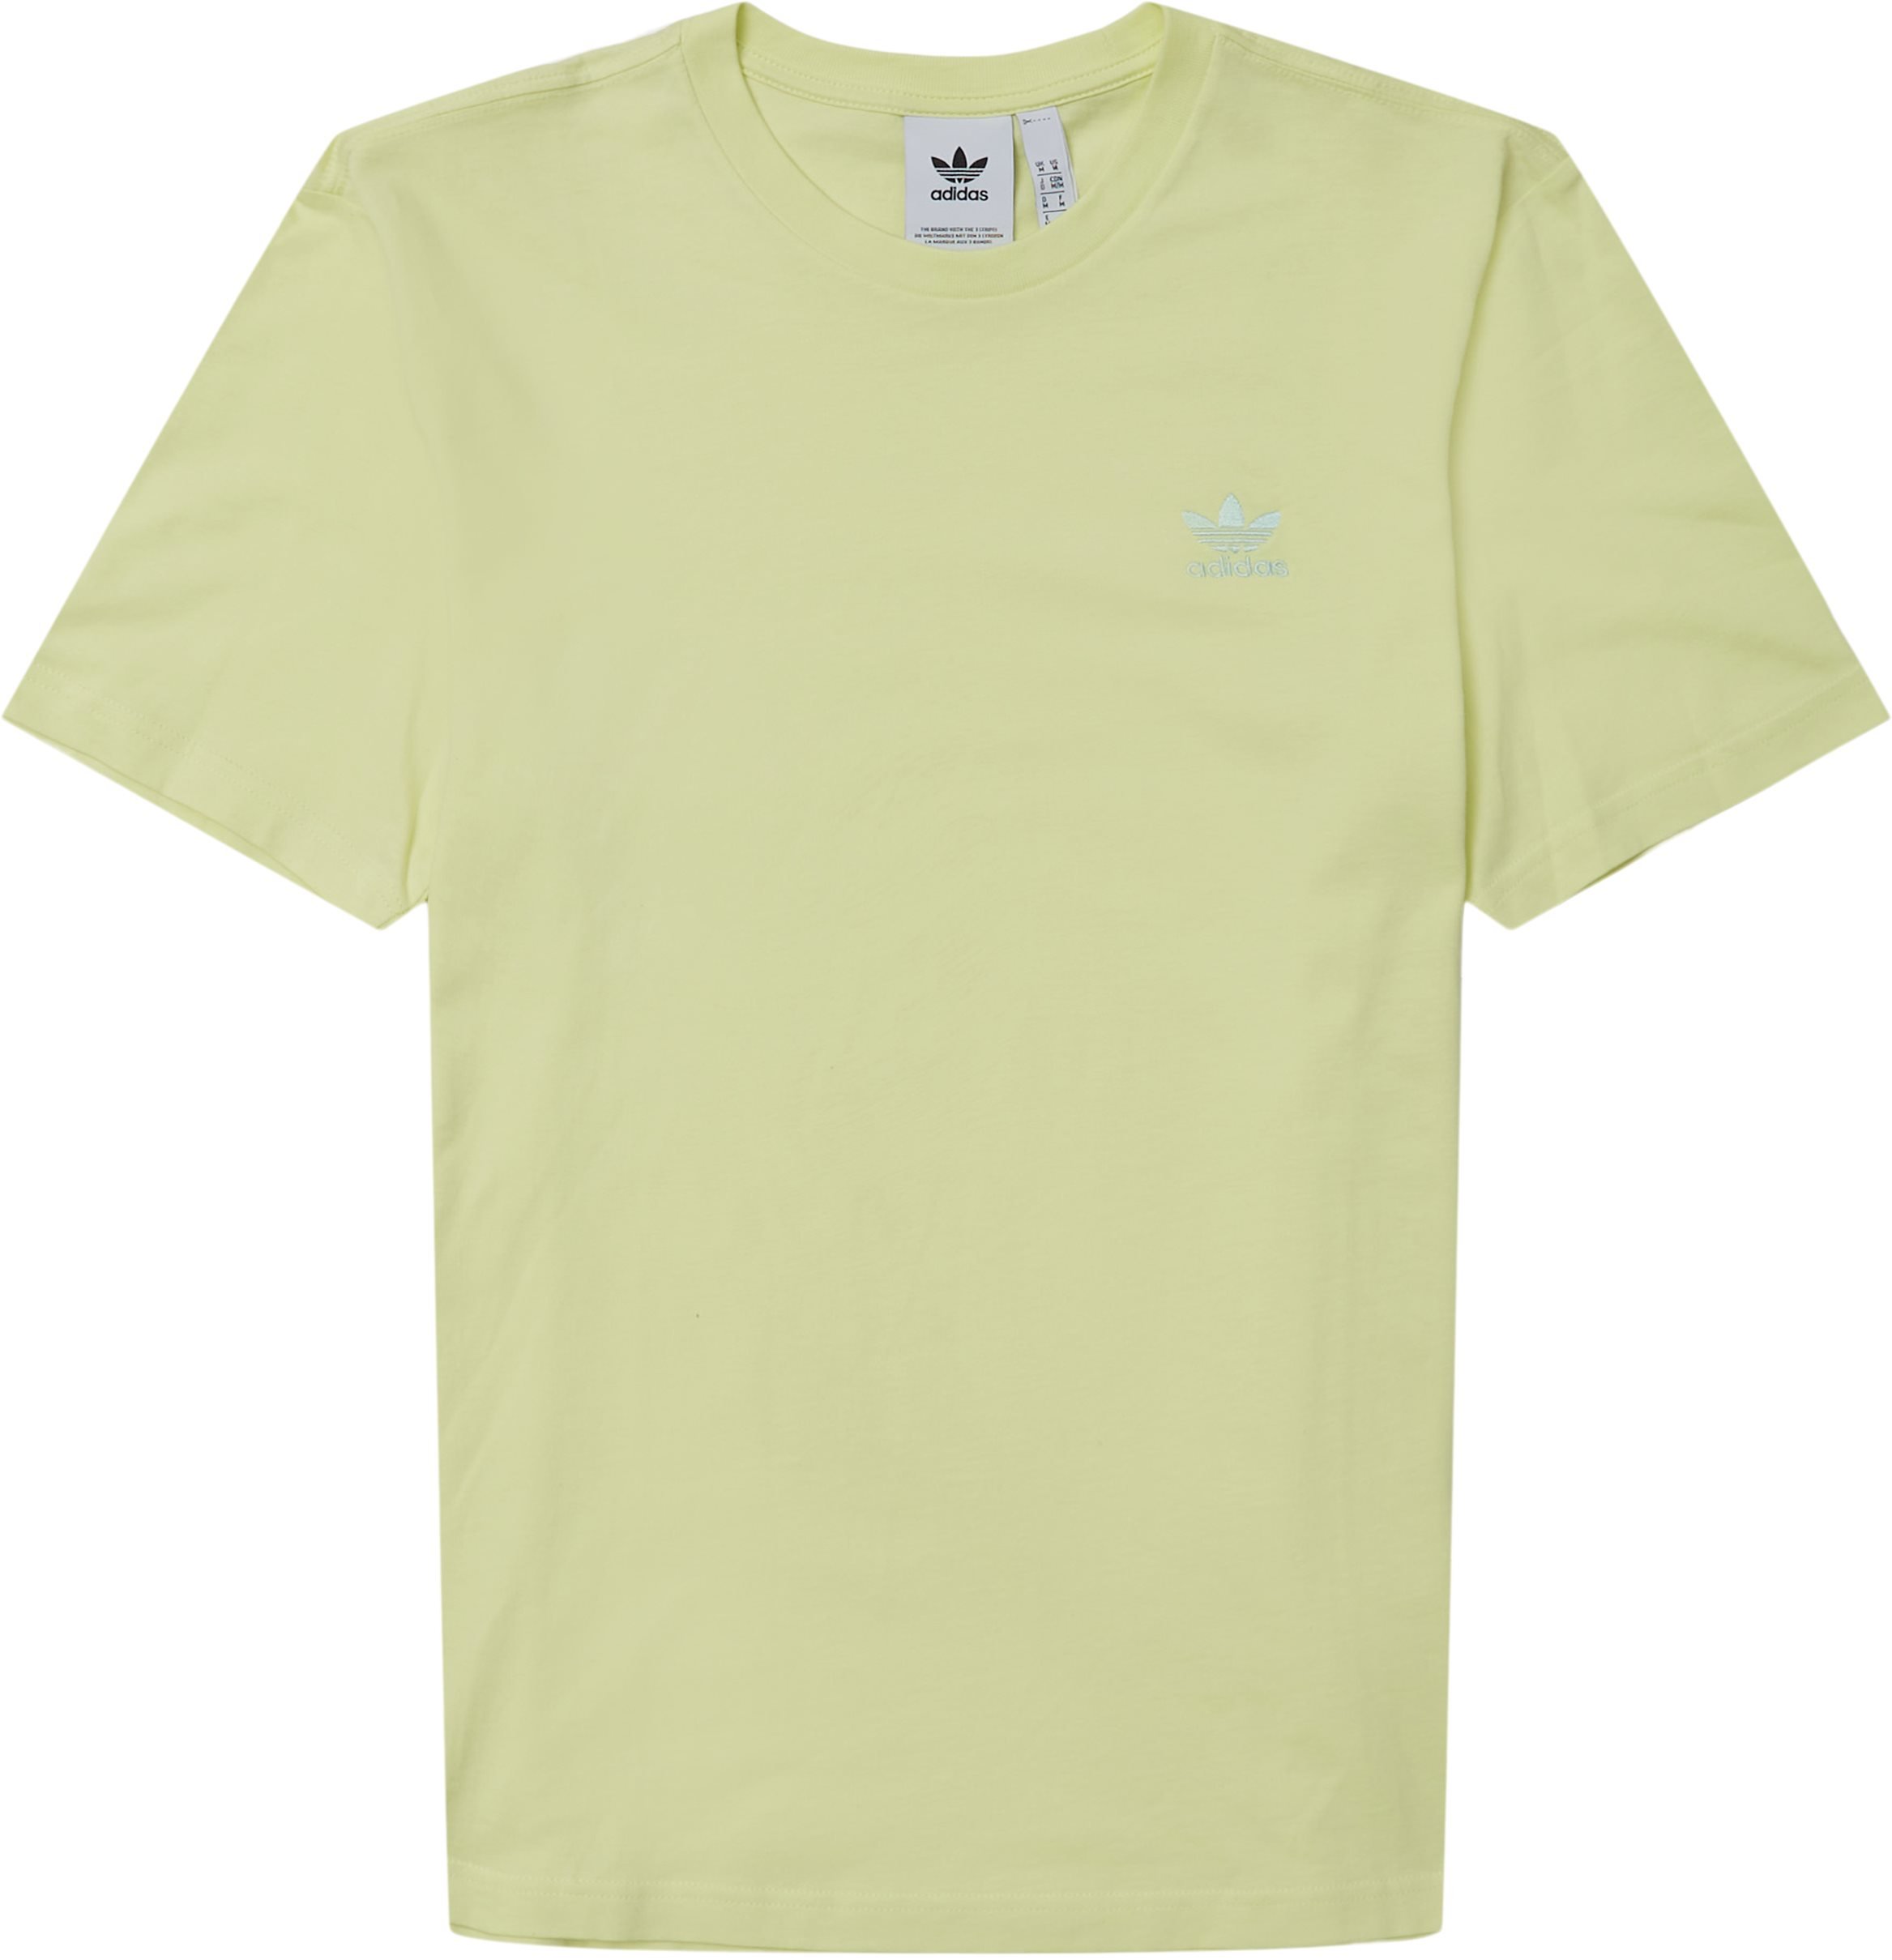 Essential Tee  - T-shirts - Regular fit - Yellow